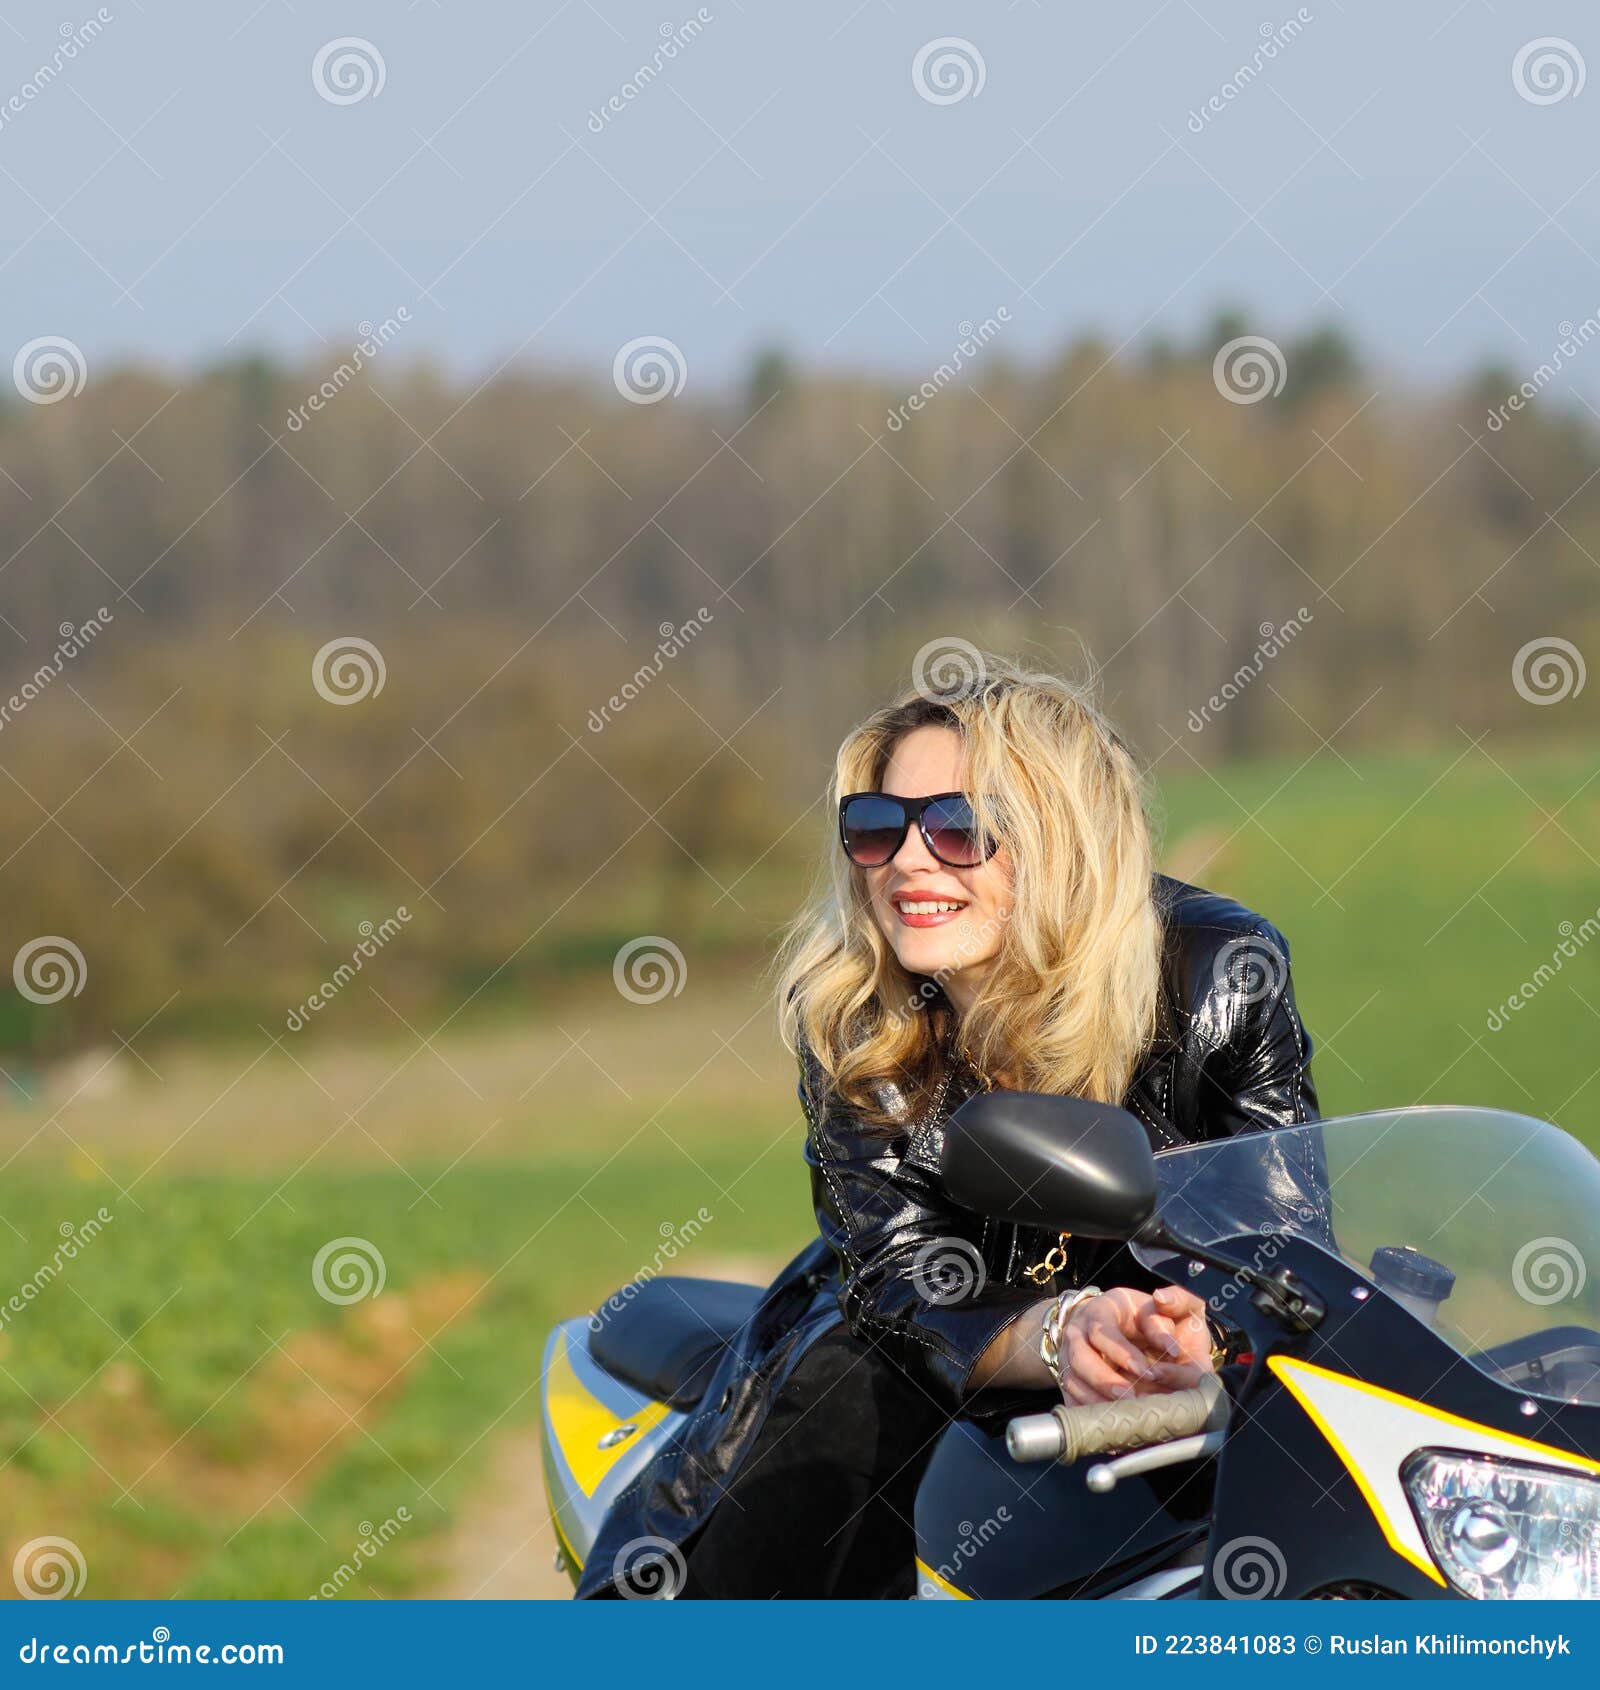 Portrait of a Beautiful Blonde Woman on a Sports Motorcycle Stock Image ...